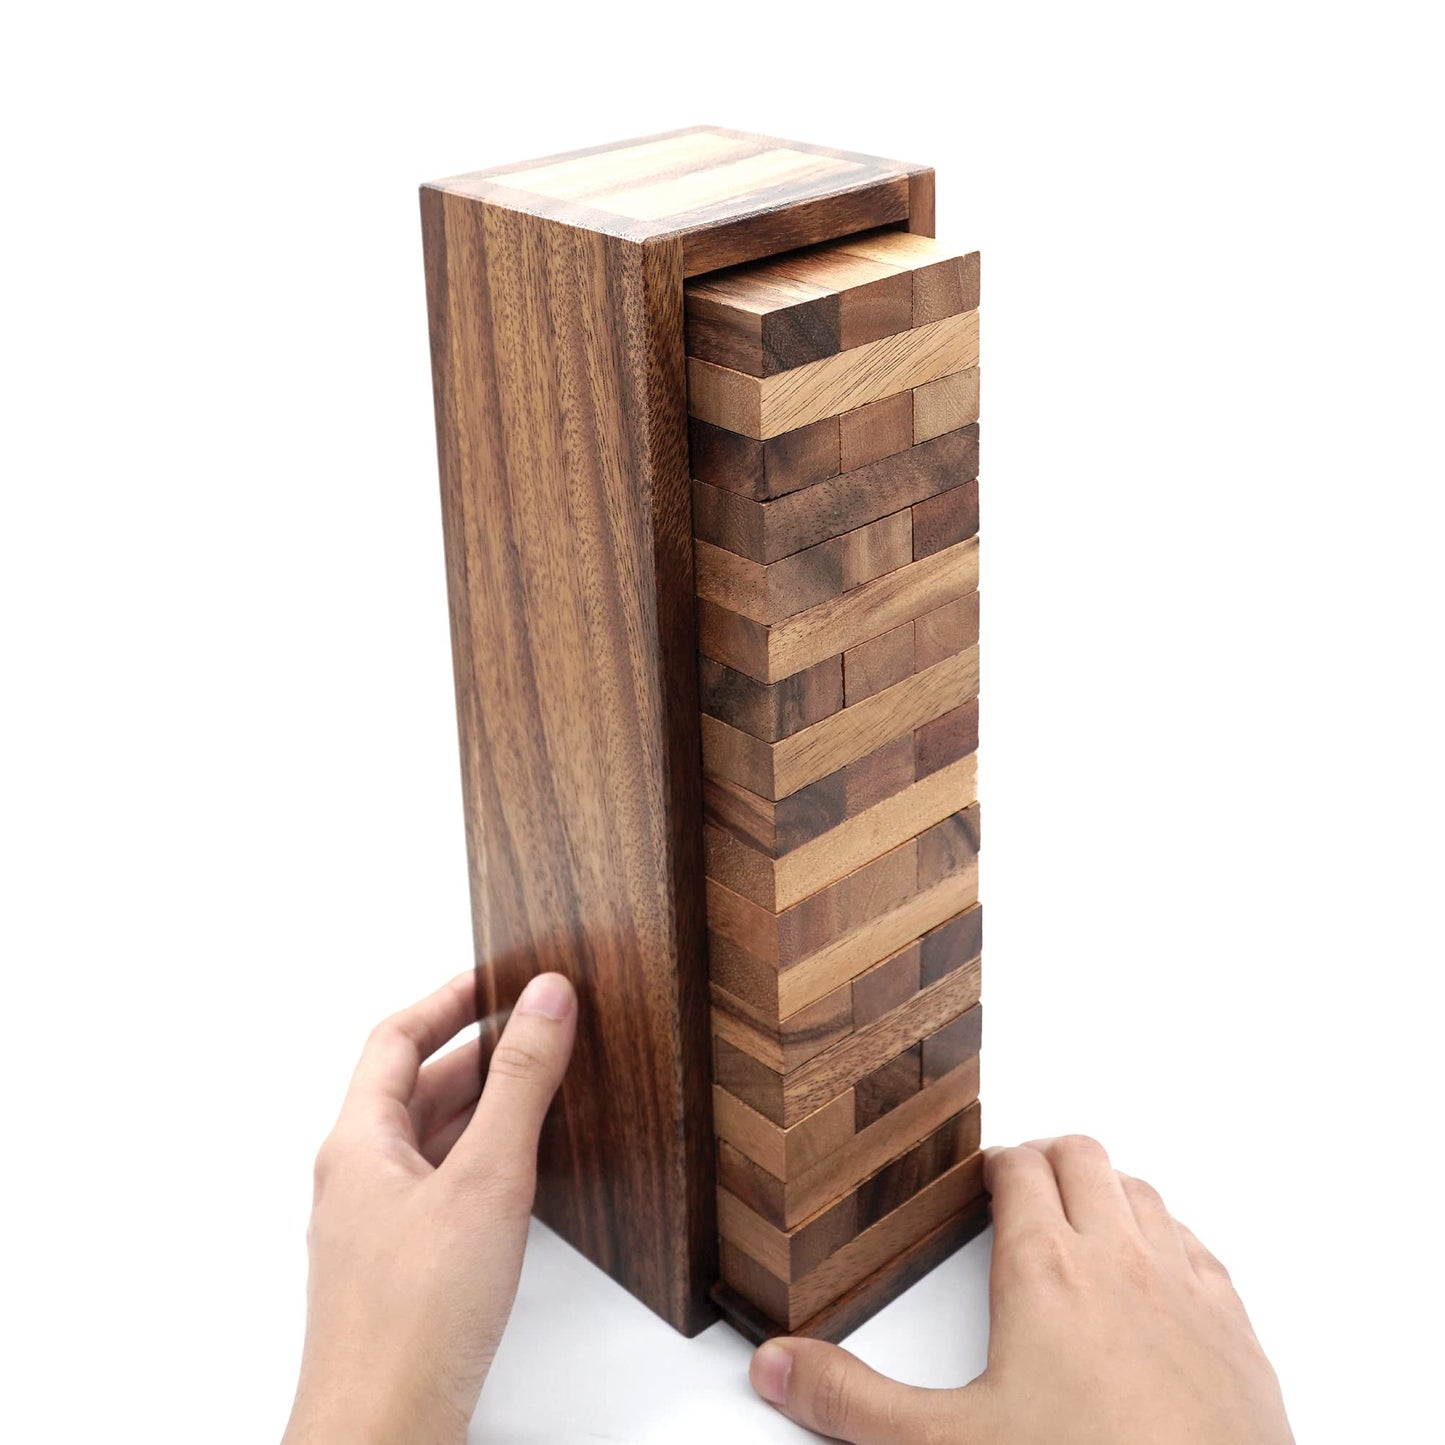 BSIRI Wood Tumbling Tower Game - Ideal for Party Games, Camping Games, Outdoor Games for Adults and Family, Classic Stacking Block Games for